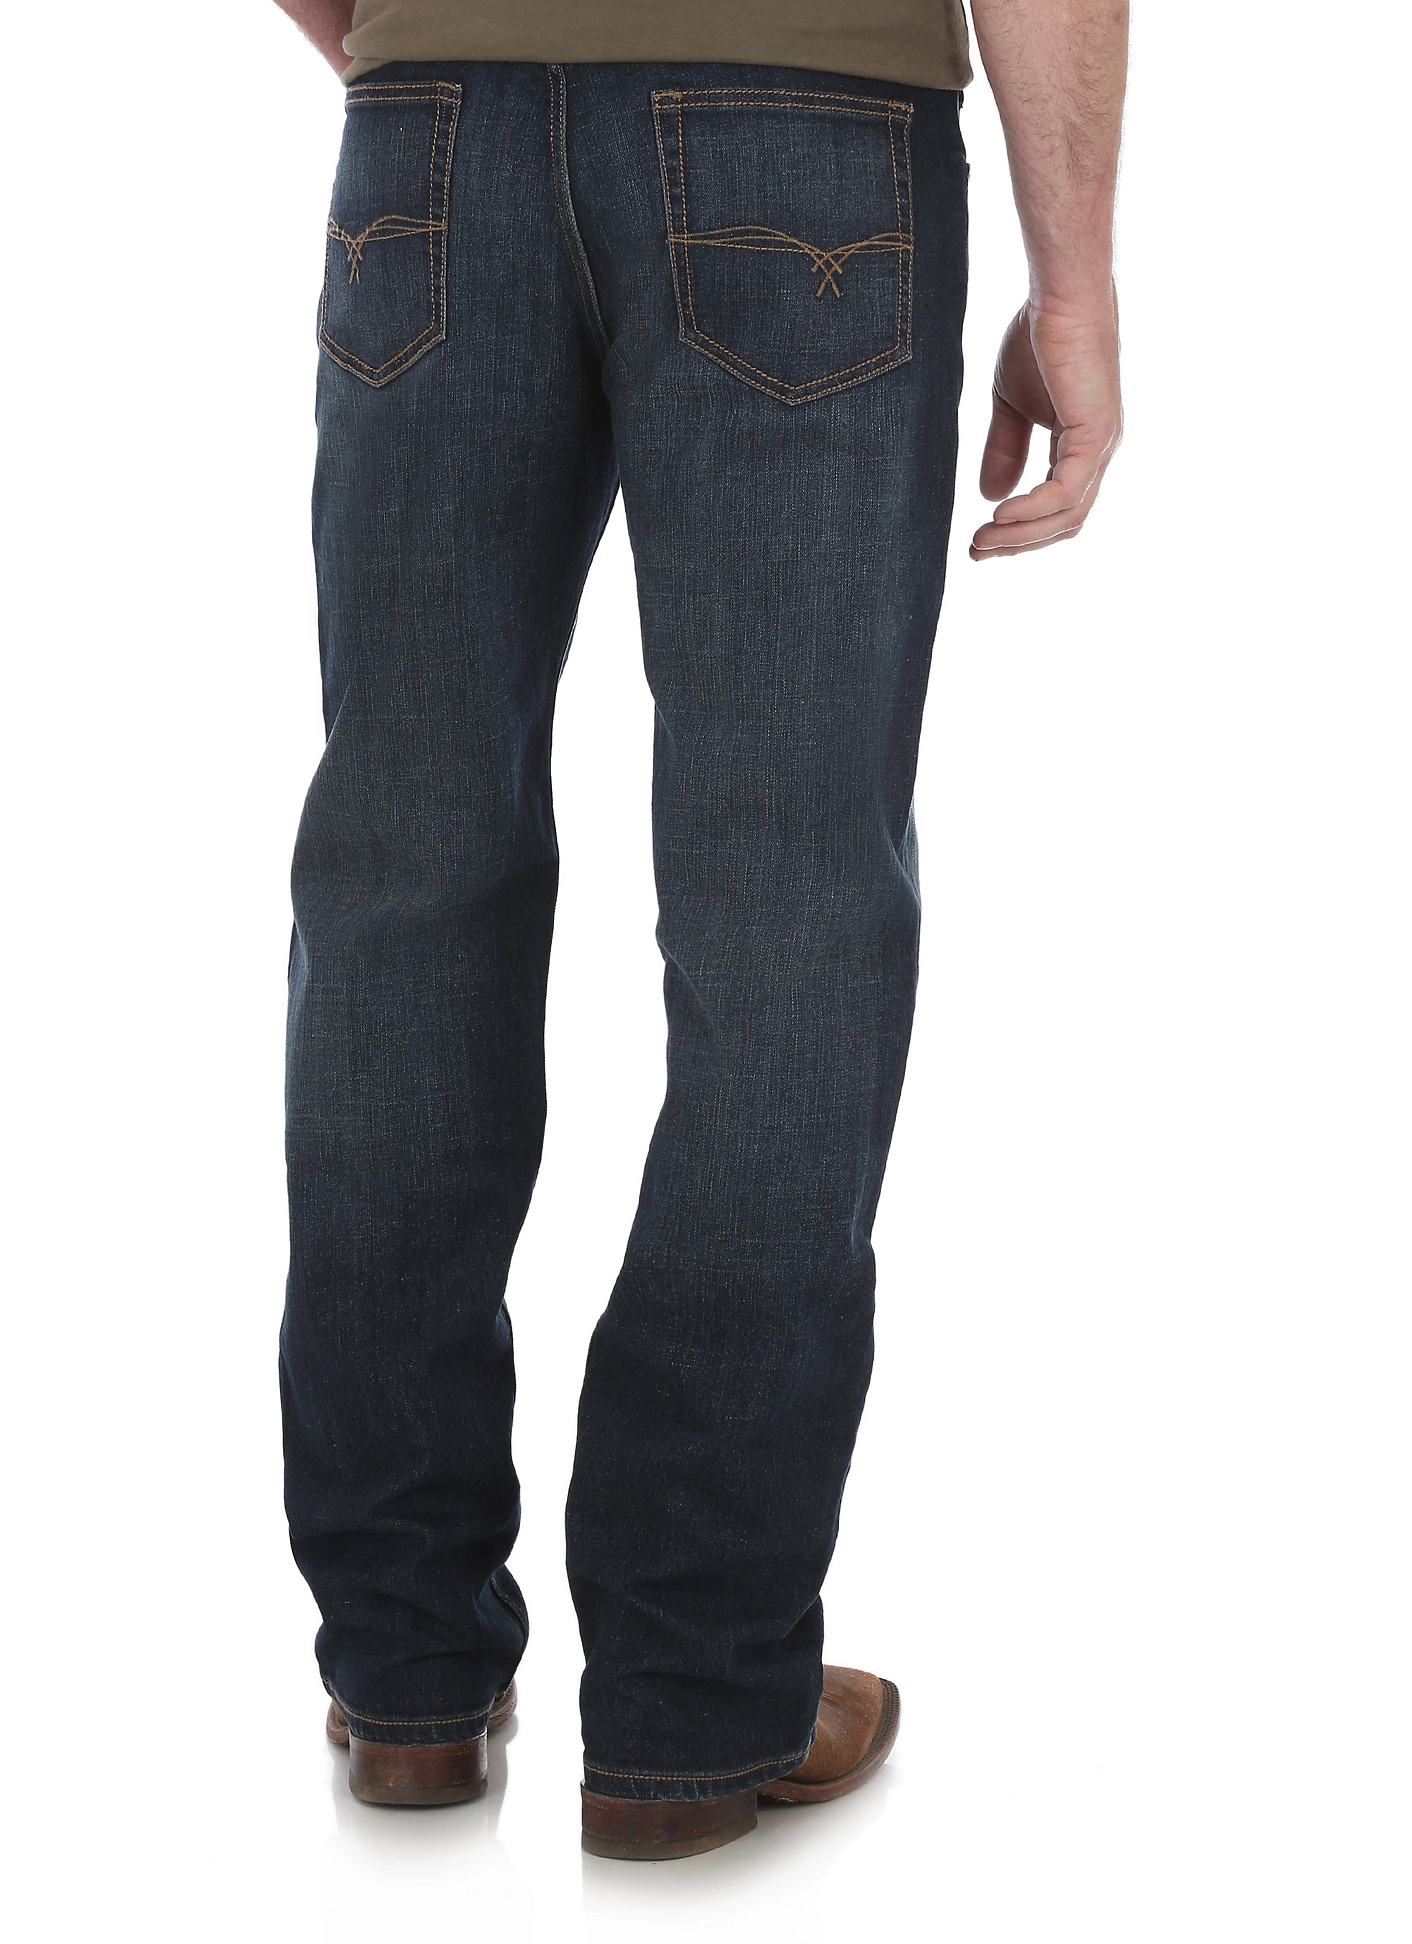 WRANGLER MENS 20X NO. 33 EXTREME RELAXED FIT JEANS - DARK WASH